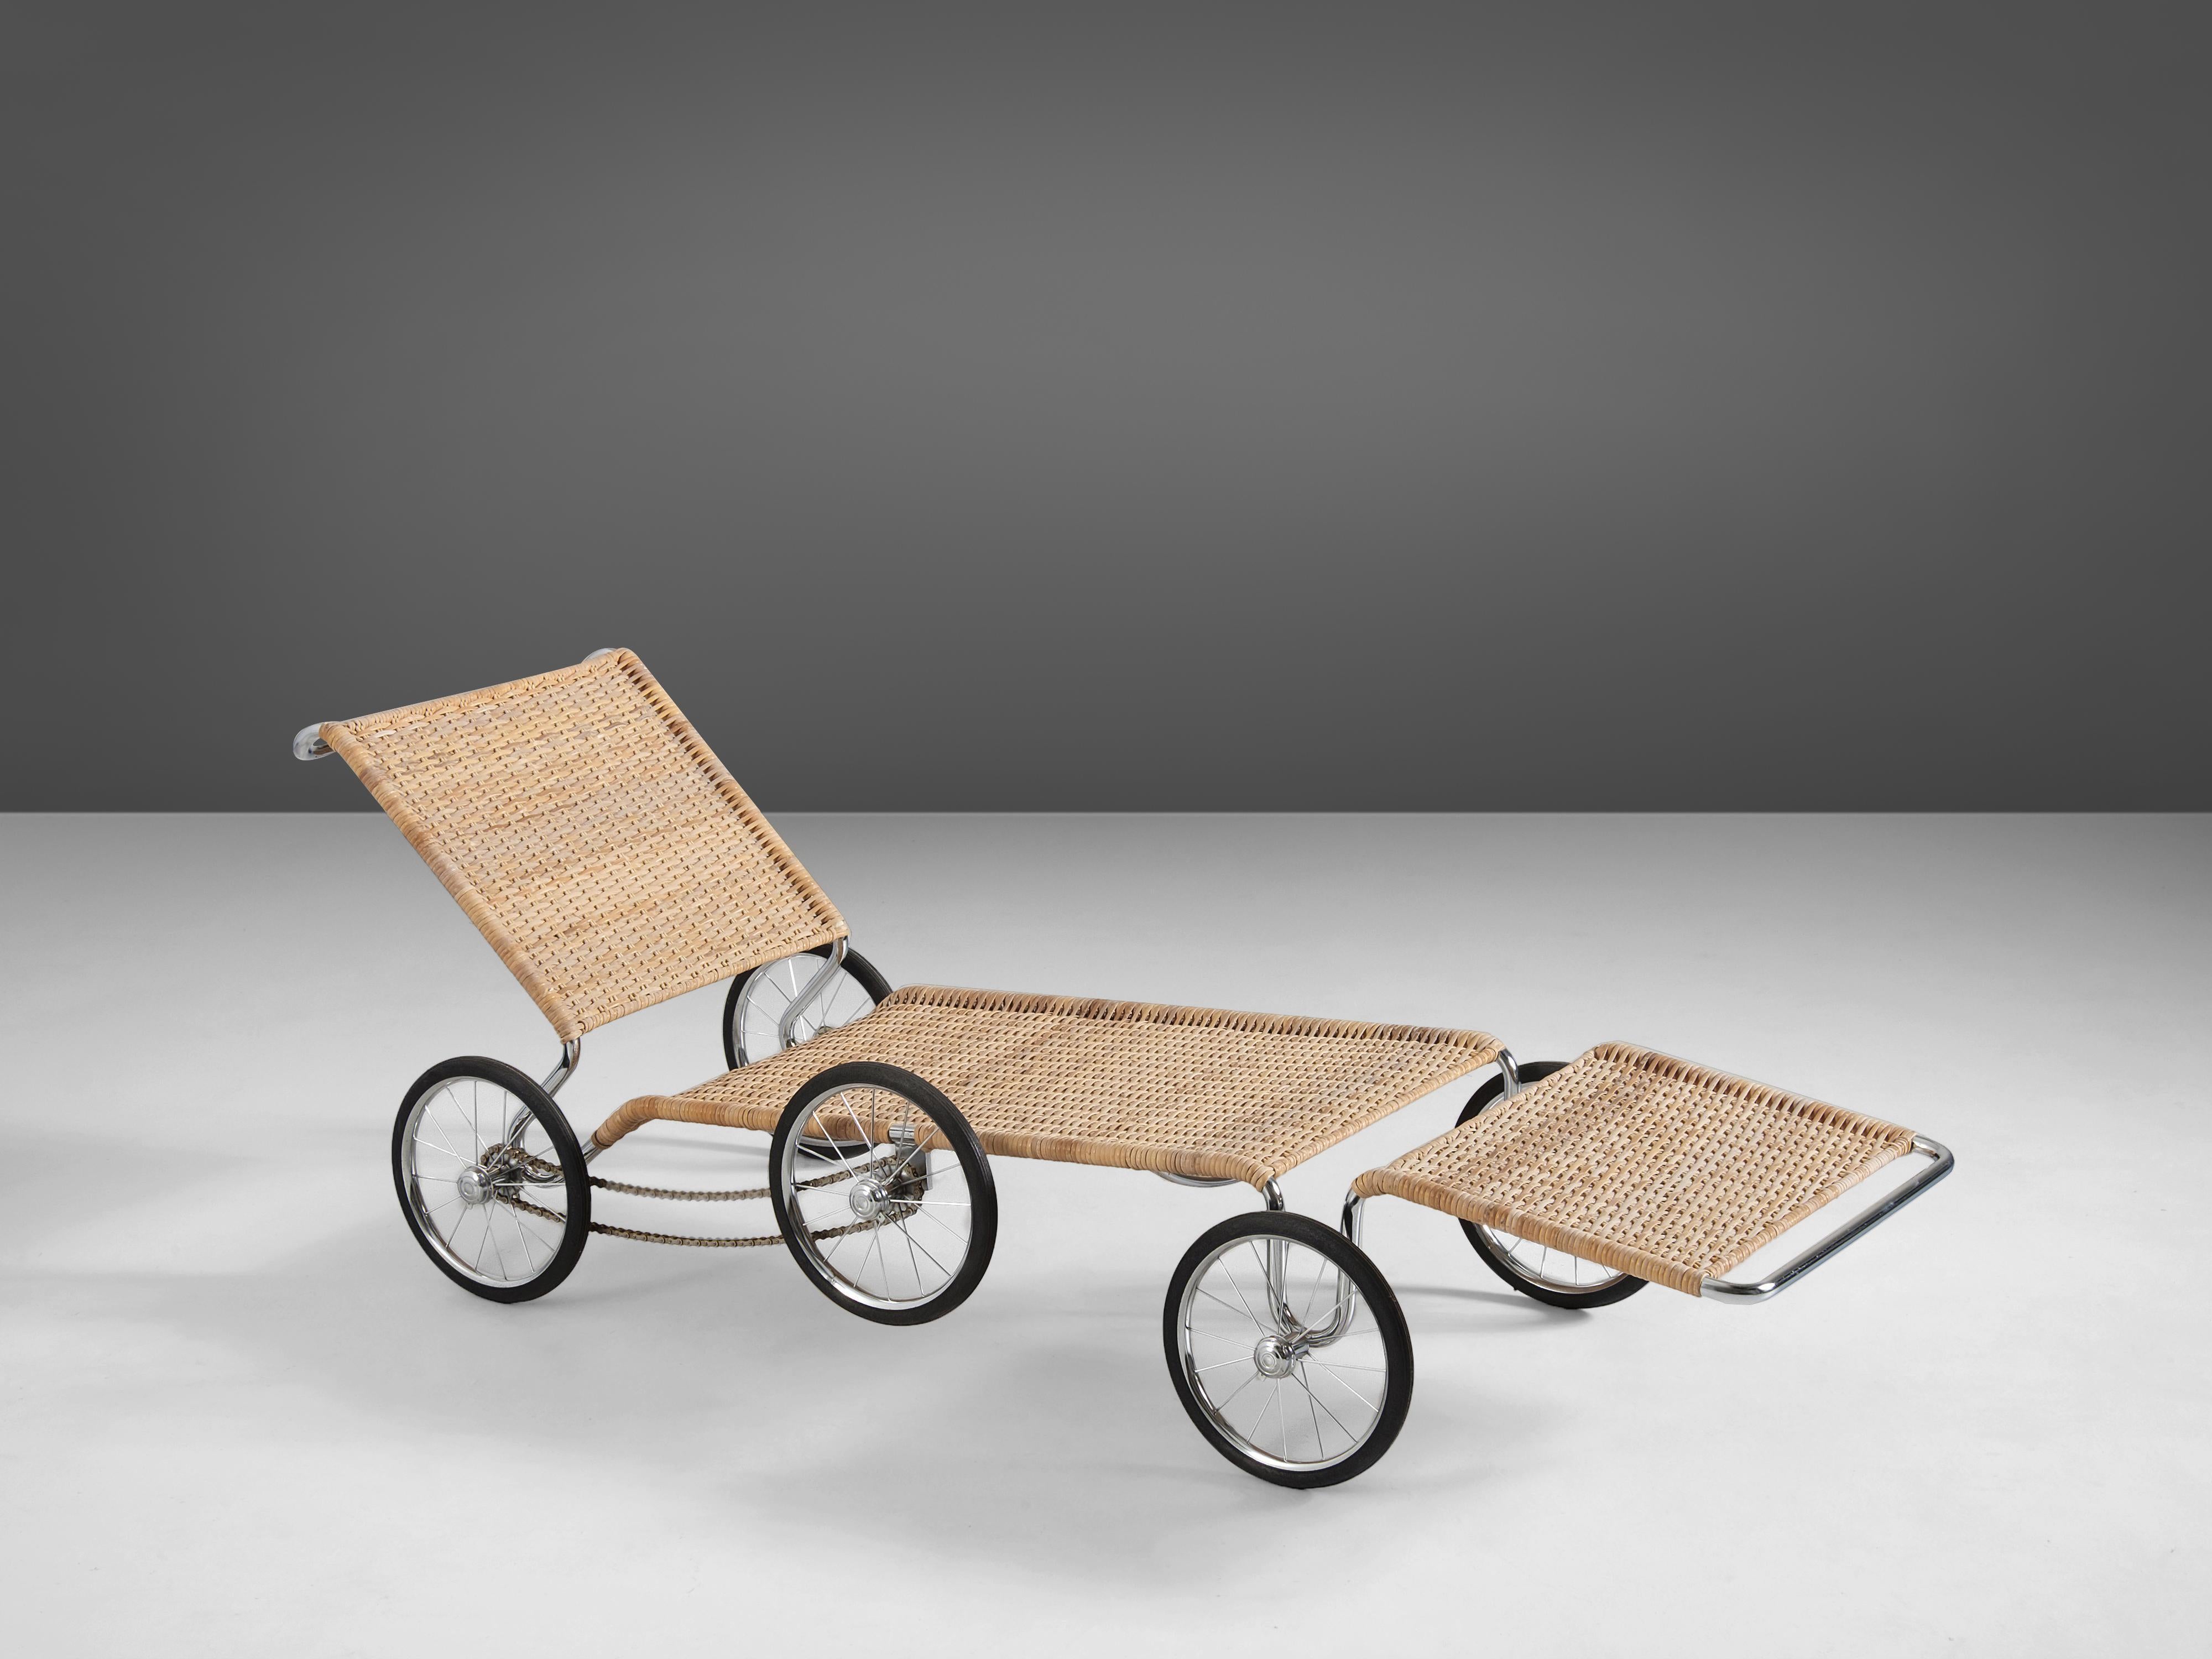 Marcel Breuer for Tecta, 'The Mobile Manifesto' chaise longue, model F41-E, cane wicker, steel, rubber, Germany, designed circa 1928 and manufactured 1984

This design by Hungarian-born modernist architect and furniture designer Marcel Breuer